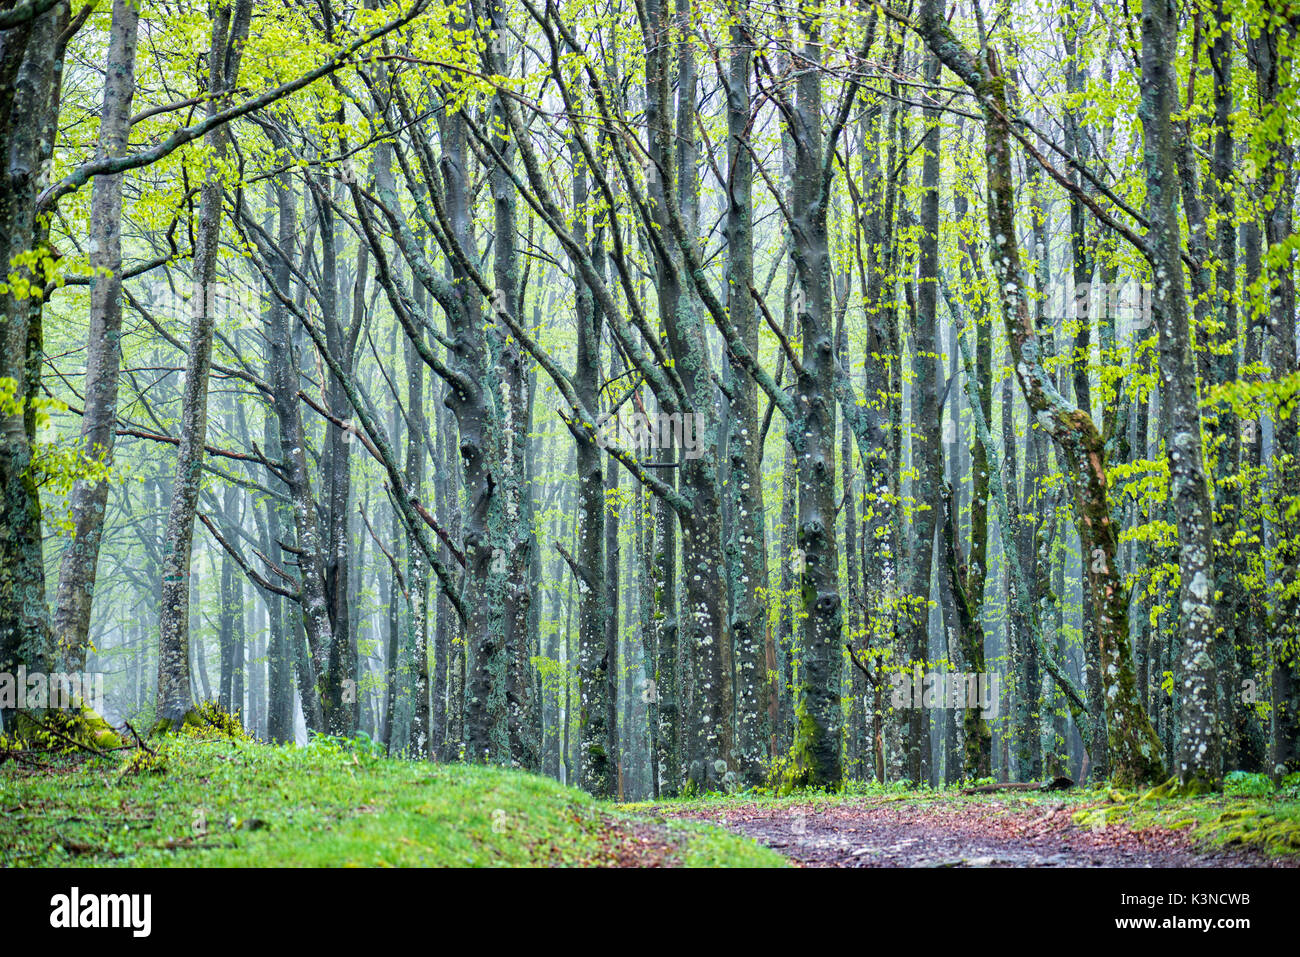 Forest in Autumn, Foreste Casentinesi NP, Emilia Romagna district, Italy Stock Photo